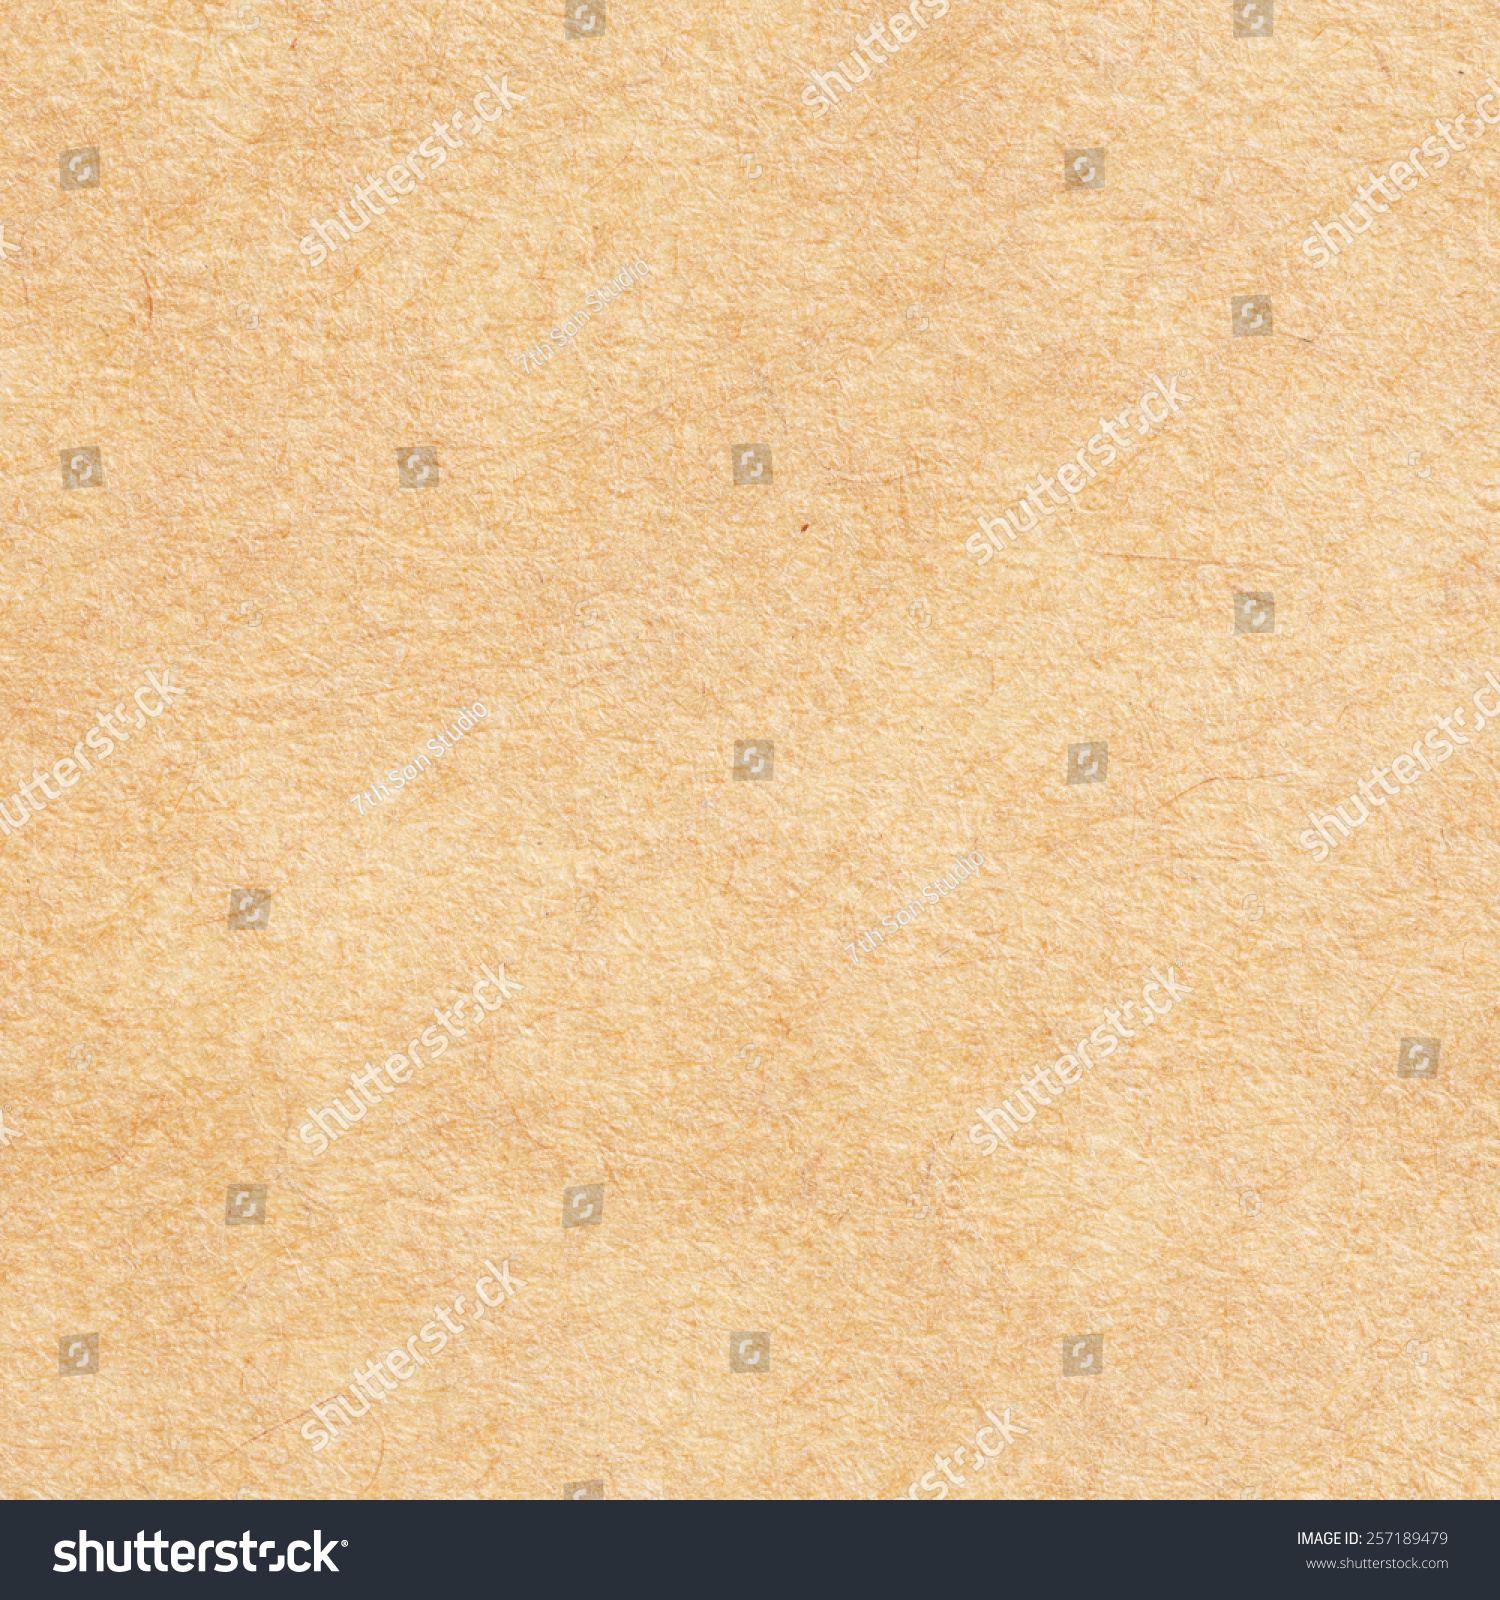 Close Old Dirty Paper Texture Background Stock Photo 257189479 ...